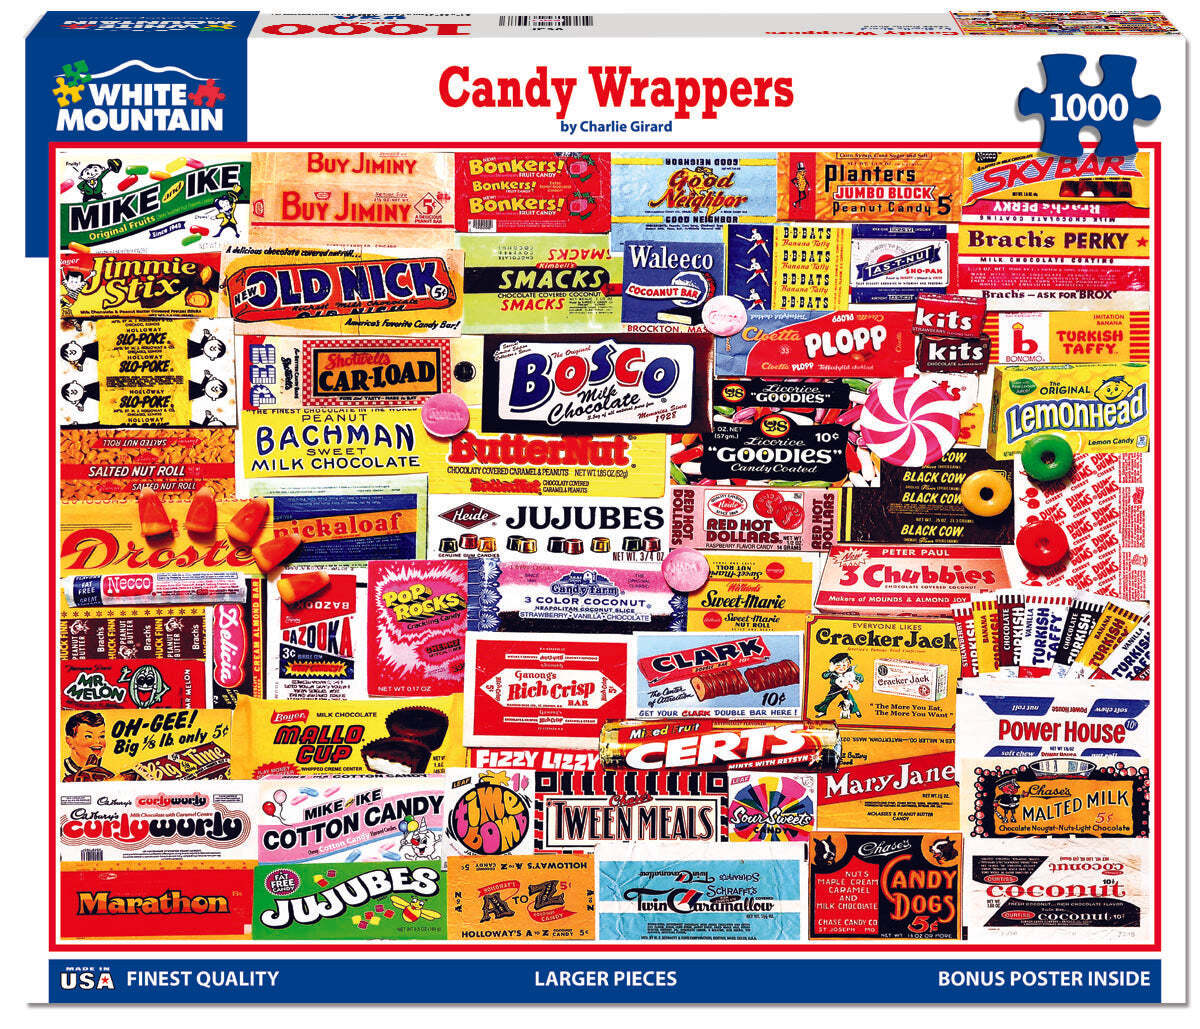 Candy Wrappers (862pz) - 1000 Piece Jigsaw Puzzle